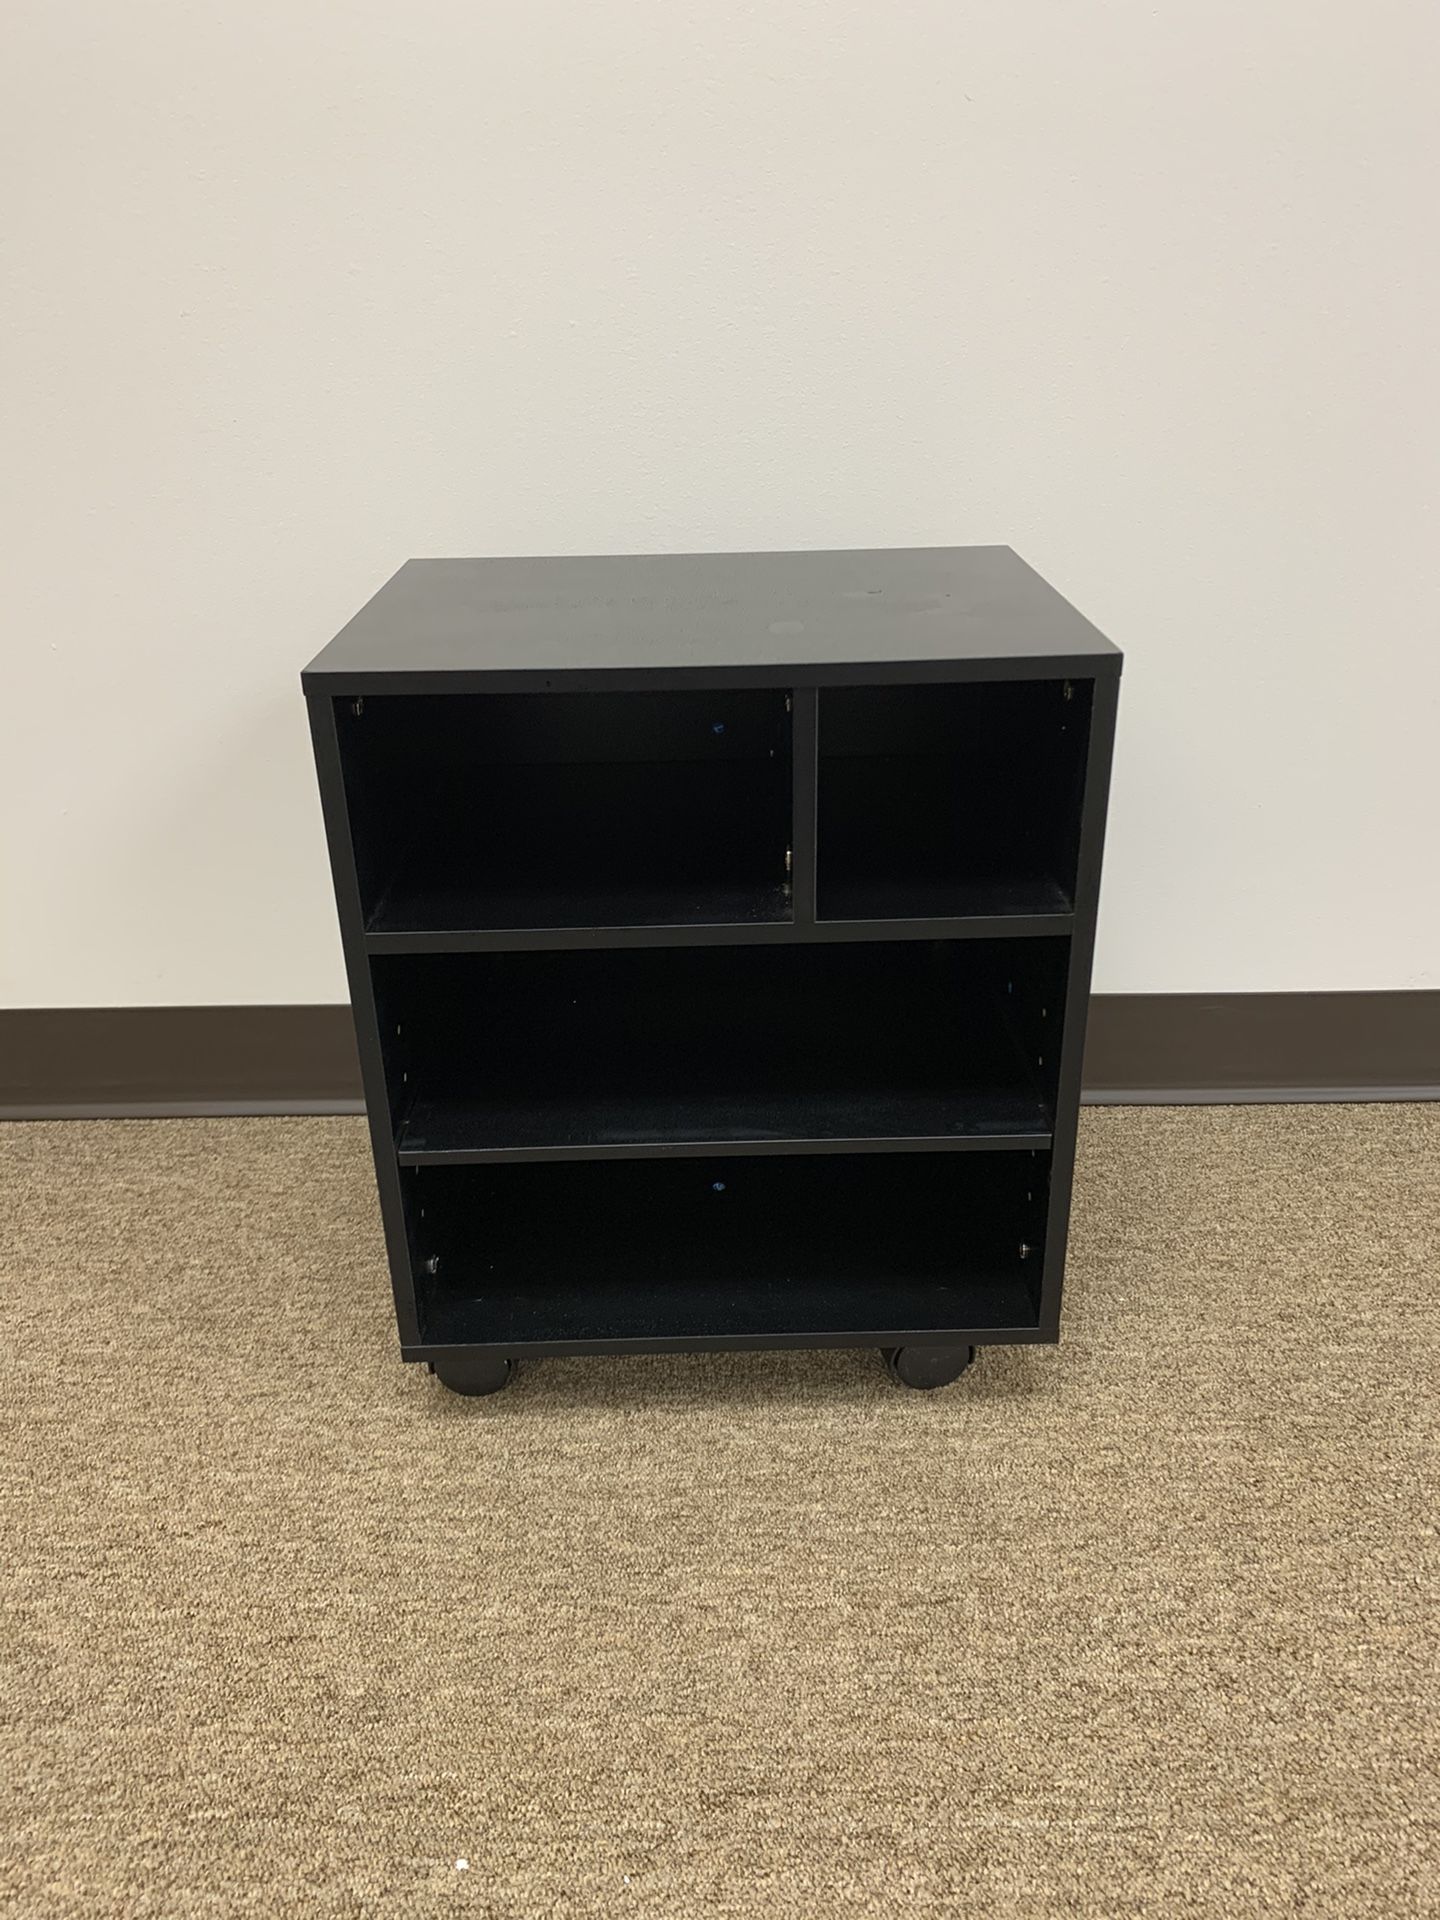 Rolling Printer Stand With Organizer Rack, Black.